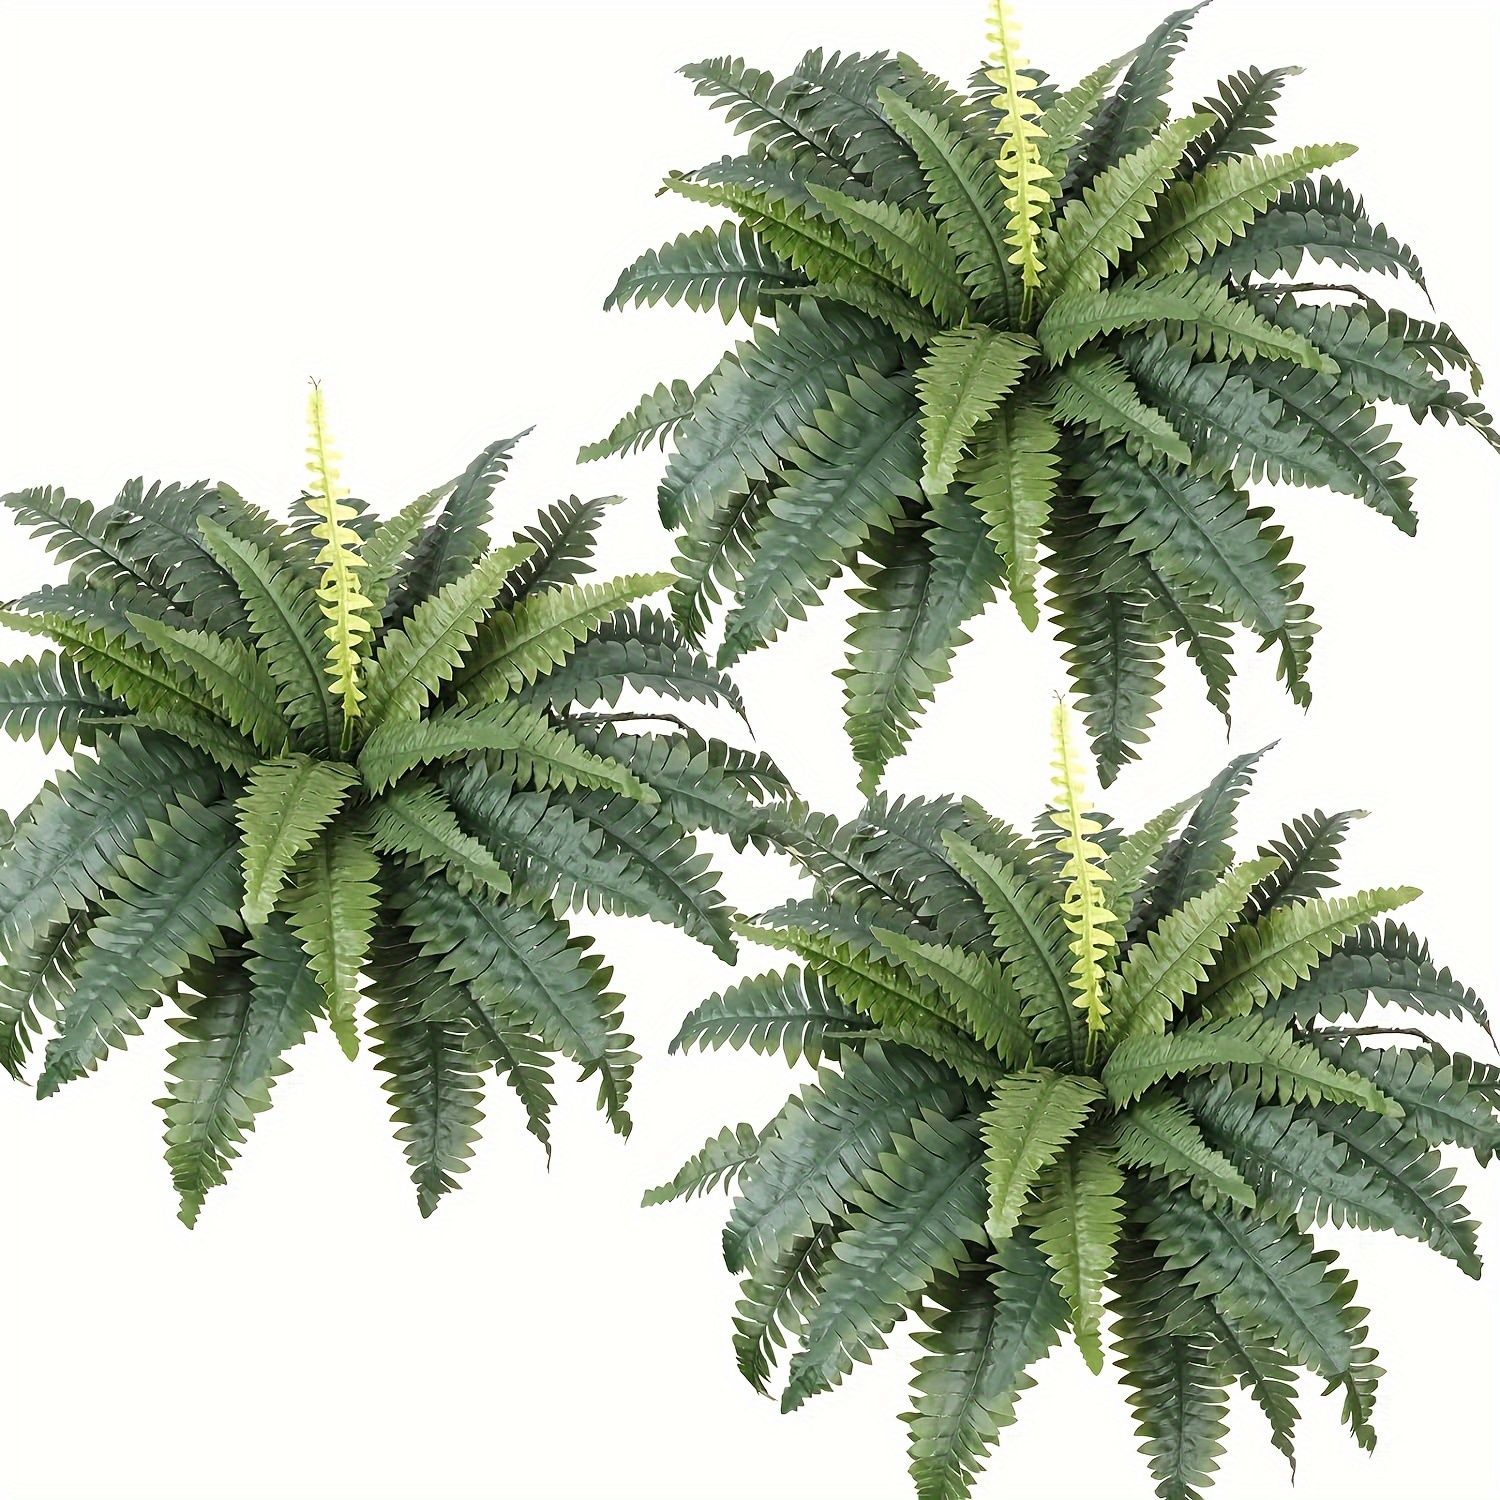 

Large Uv-resistant Artificial Boston Fern Plant - Perfect For Indoor & Outdoor Decor, Home Pots, Gardens, , And Farmhouse Accents Planters For Indoor Plants Artificial Plants For Home Decor